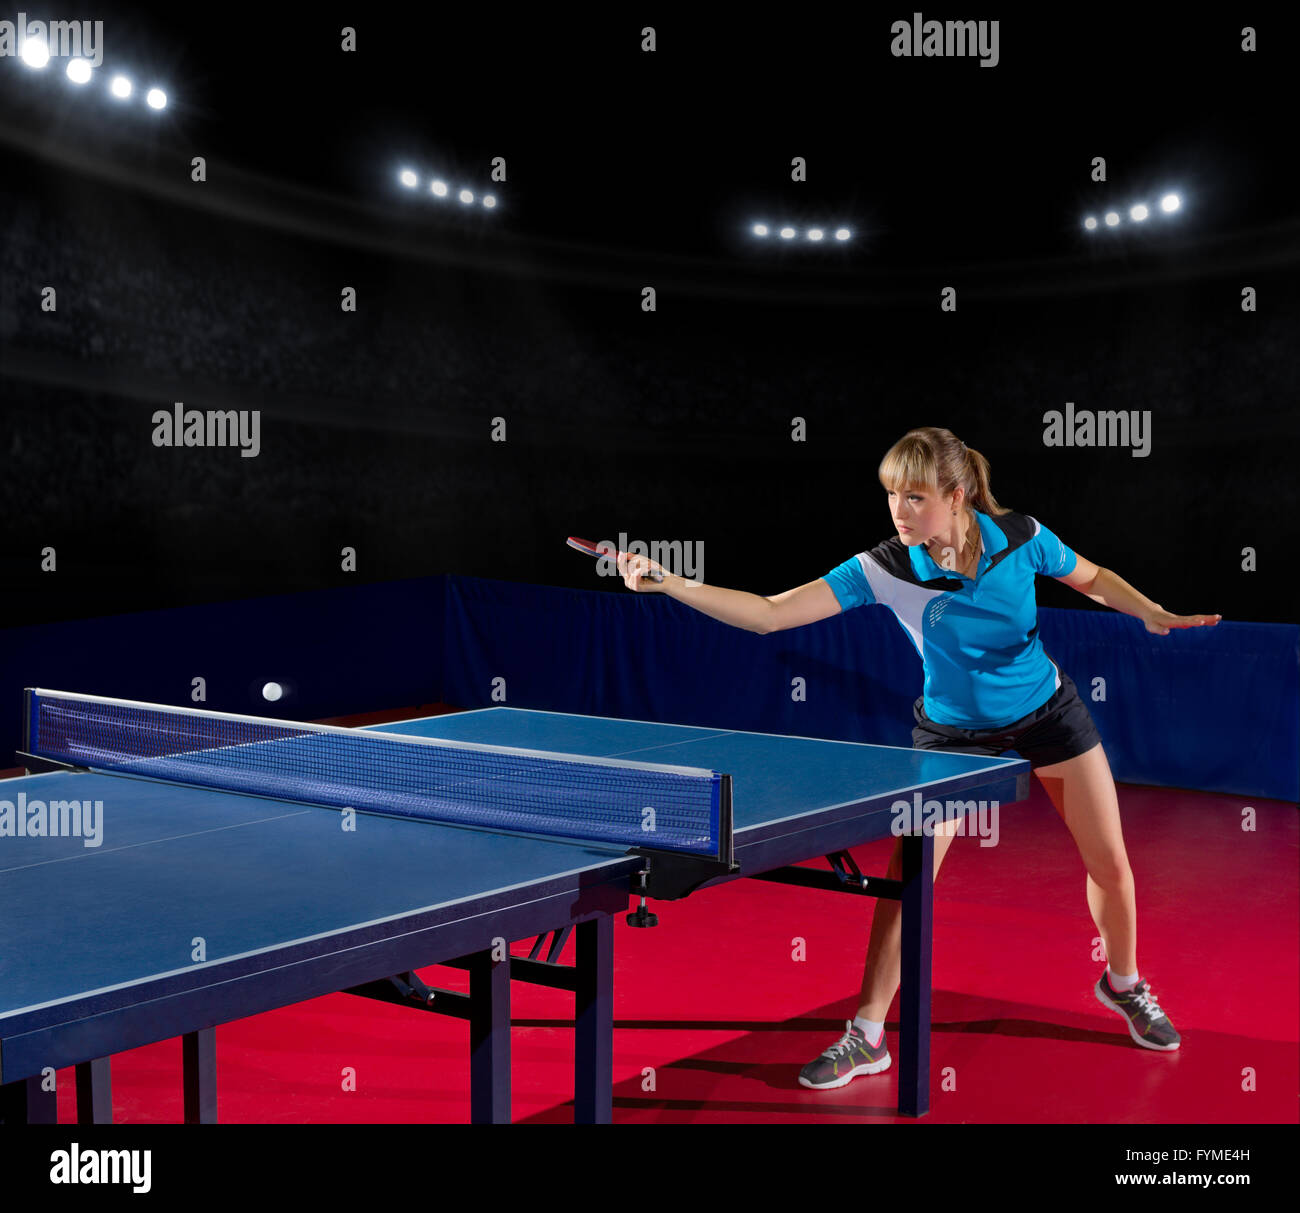 Young girl table tennis player at sports hall Stock Photo